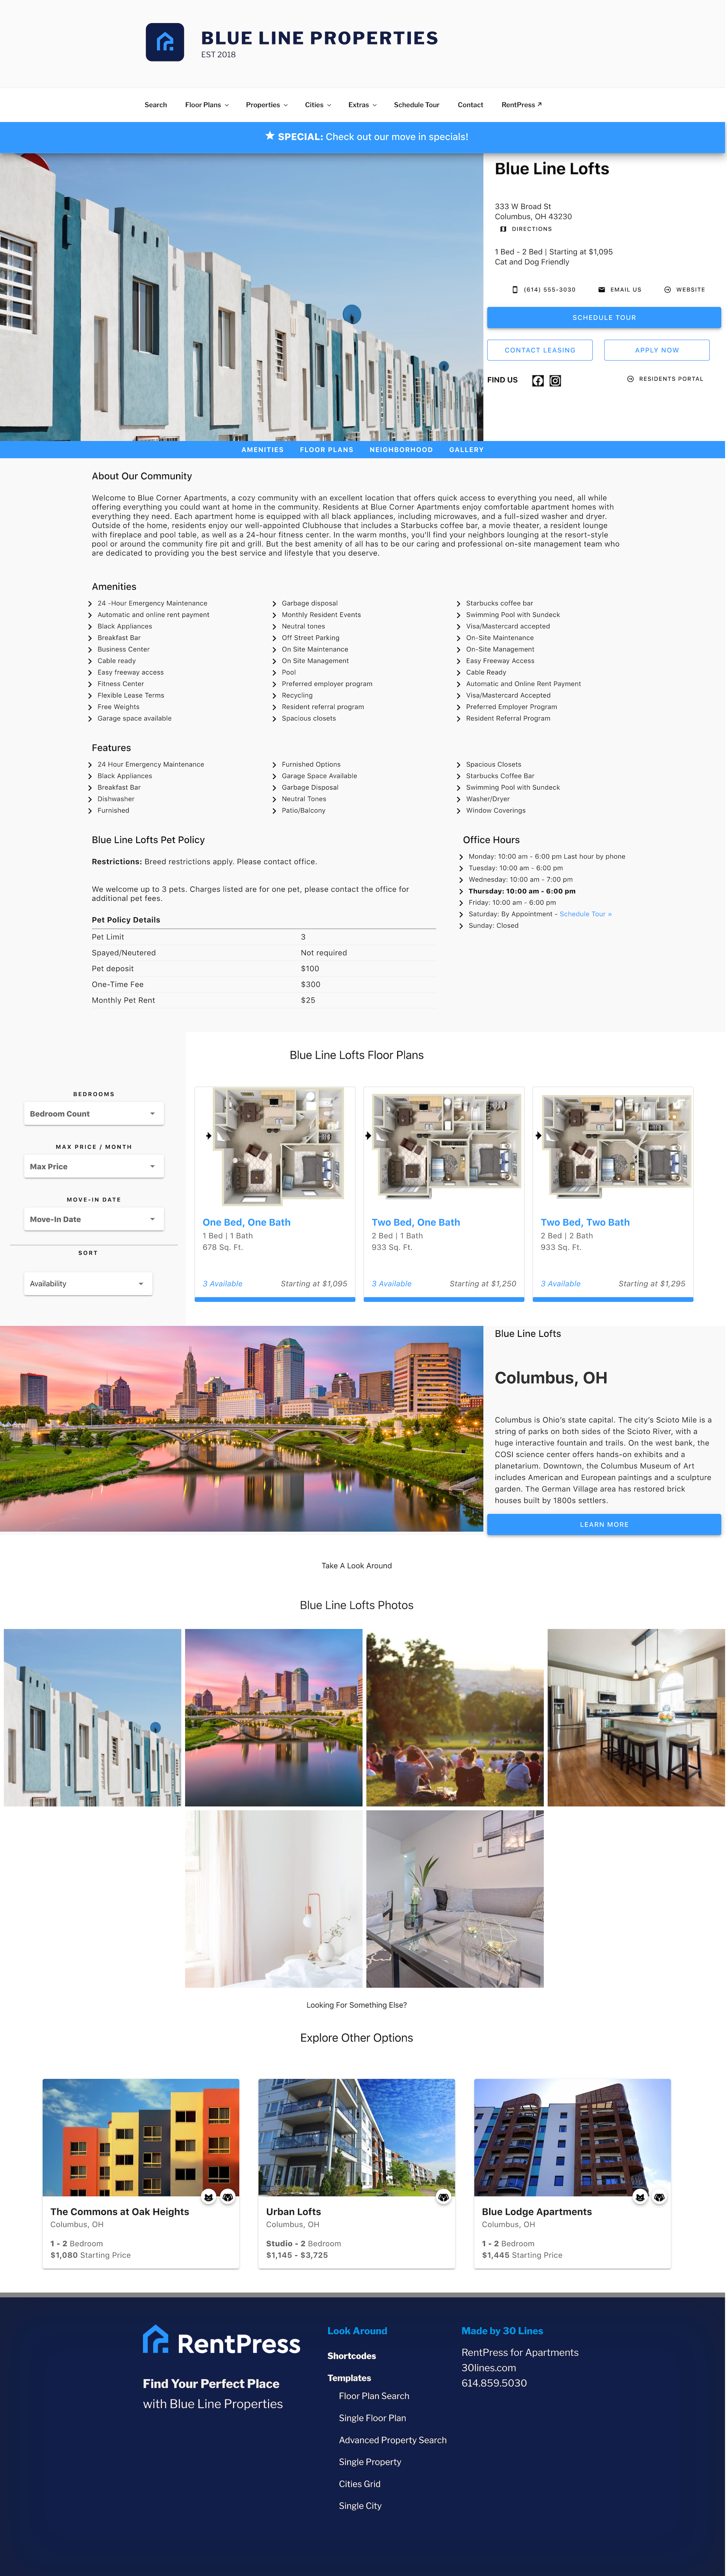 The single property listing template provided by RentPress.